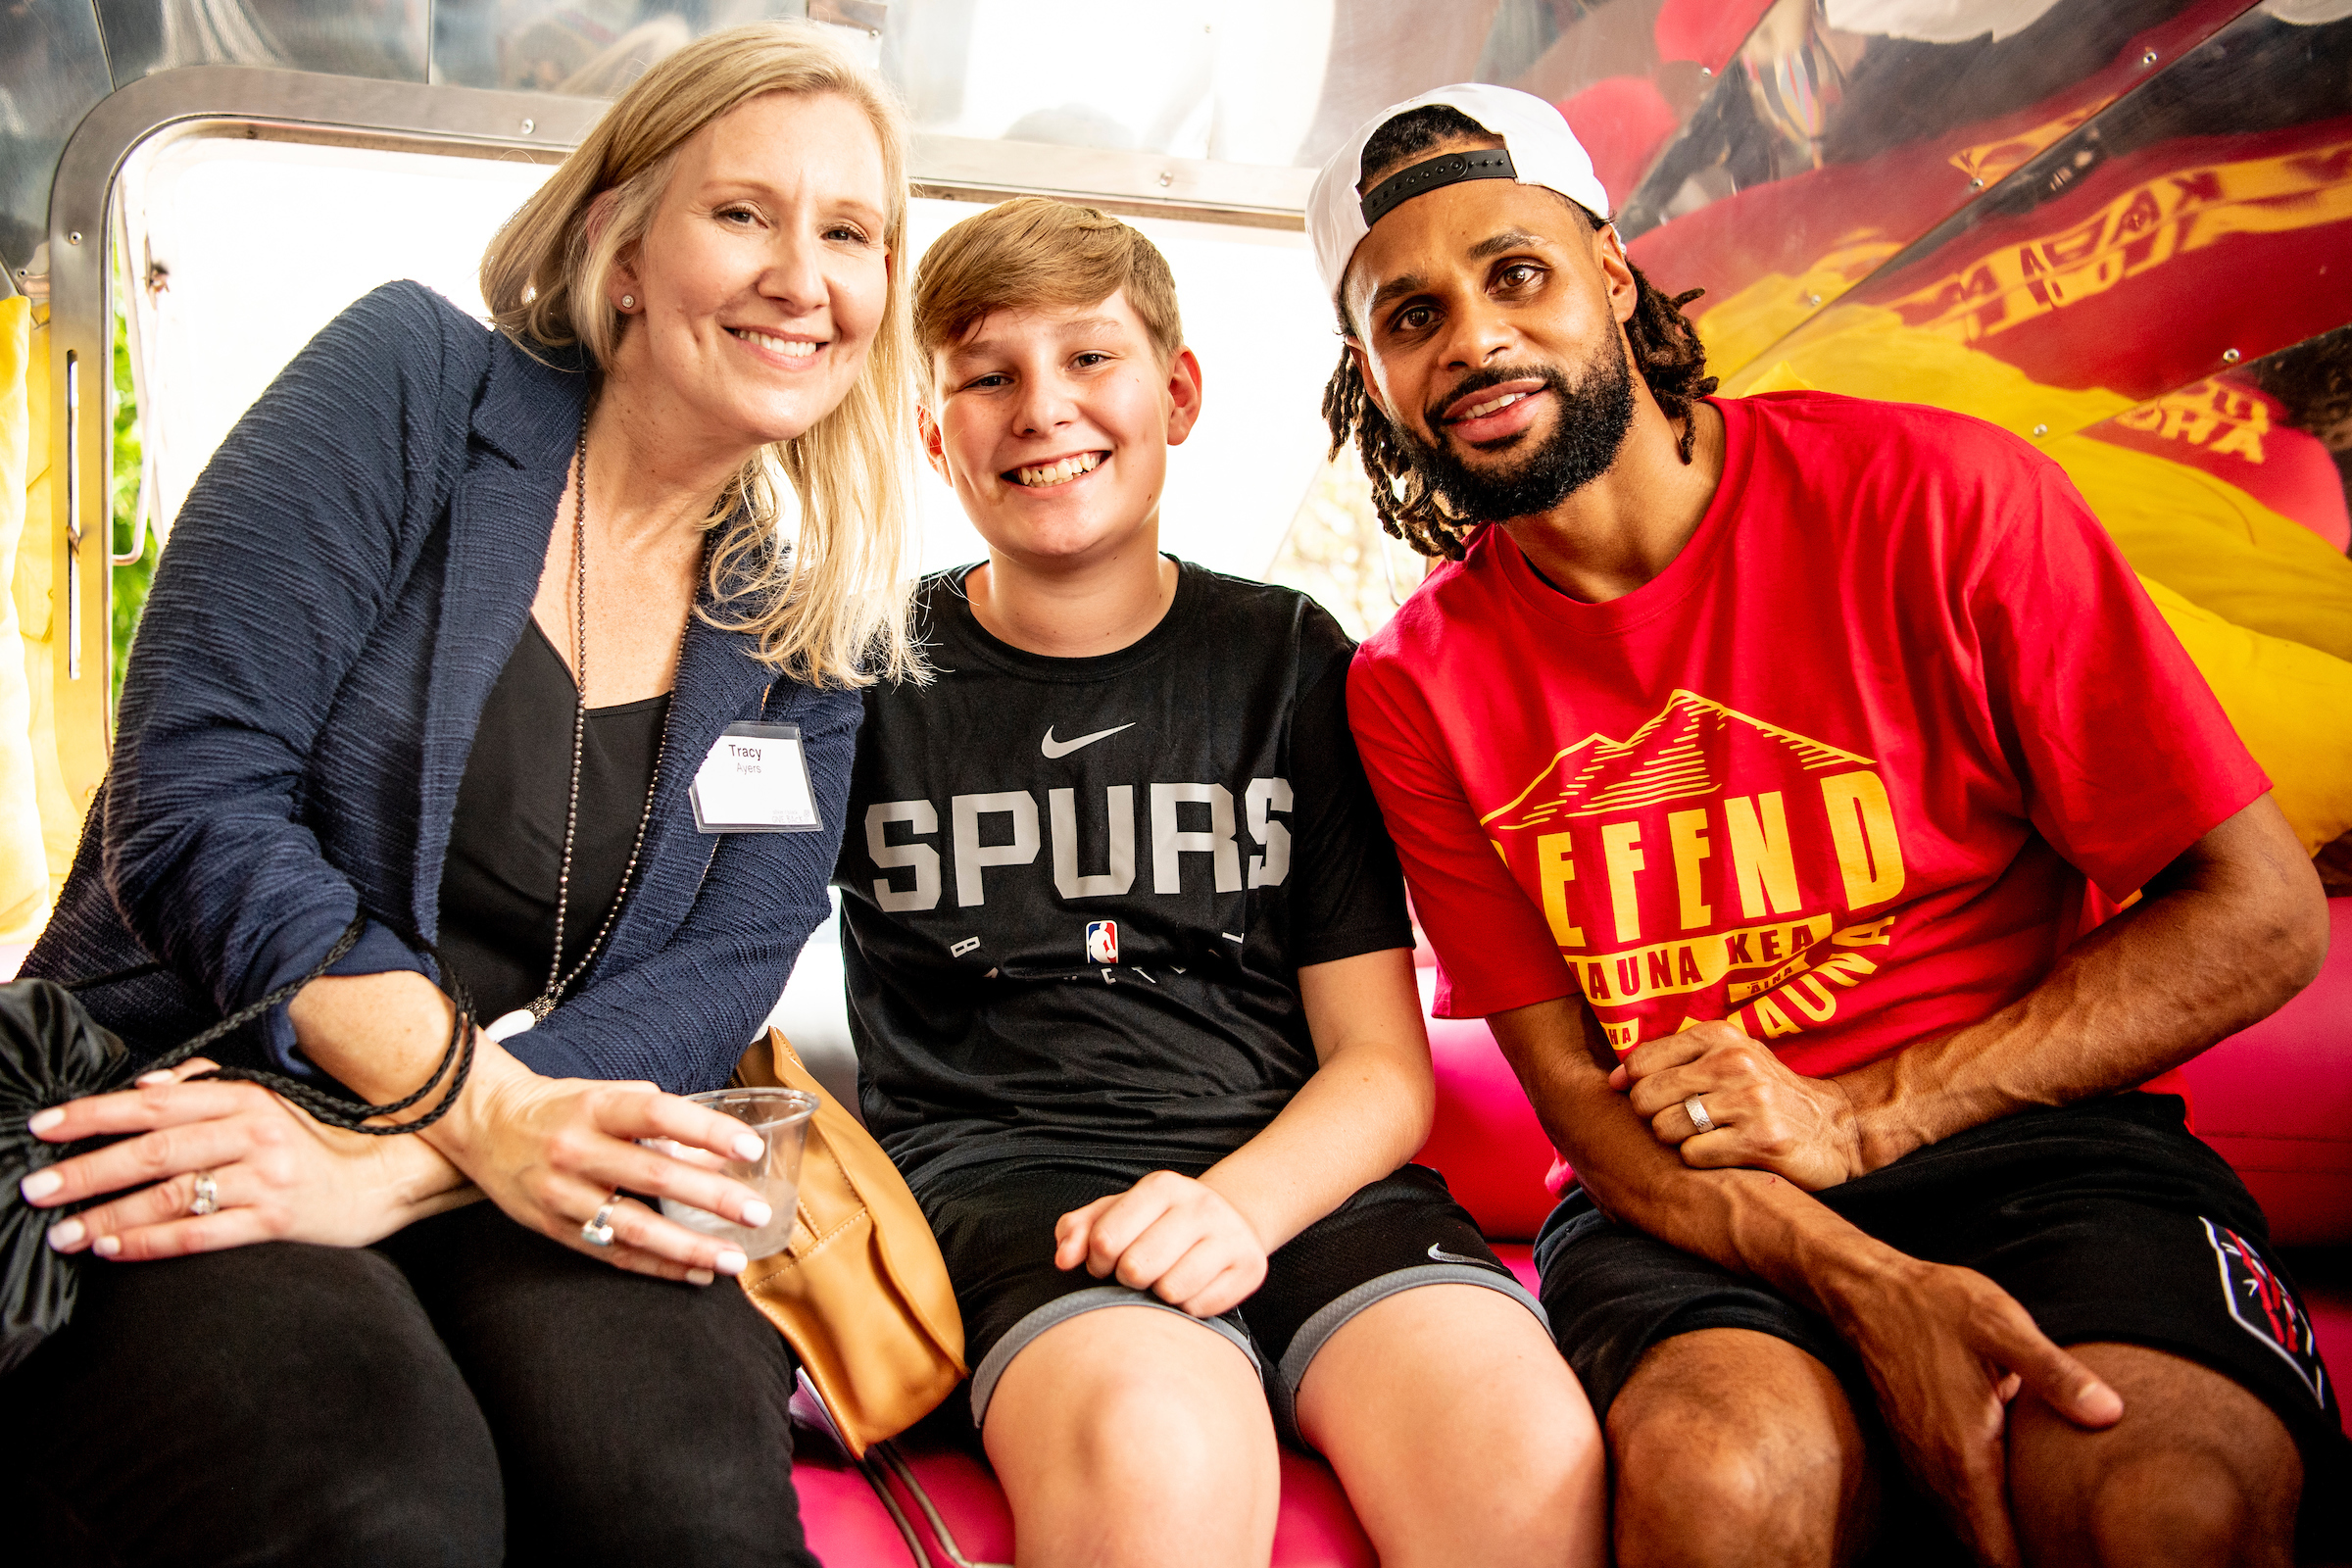 spursgive, Author at Spurs Give